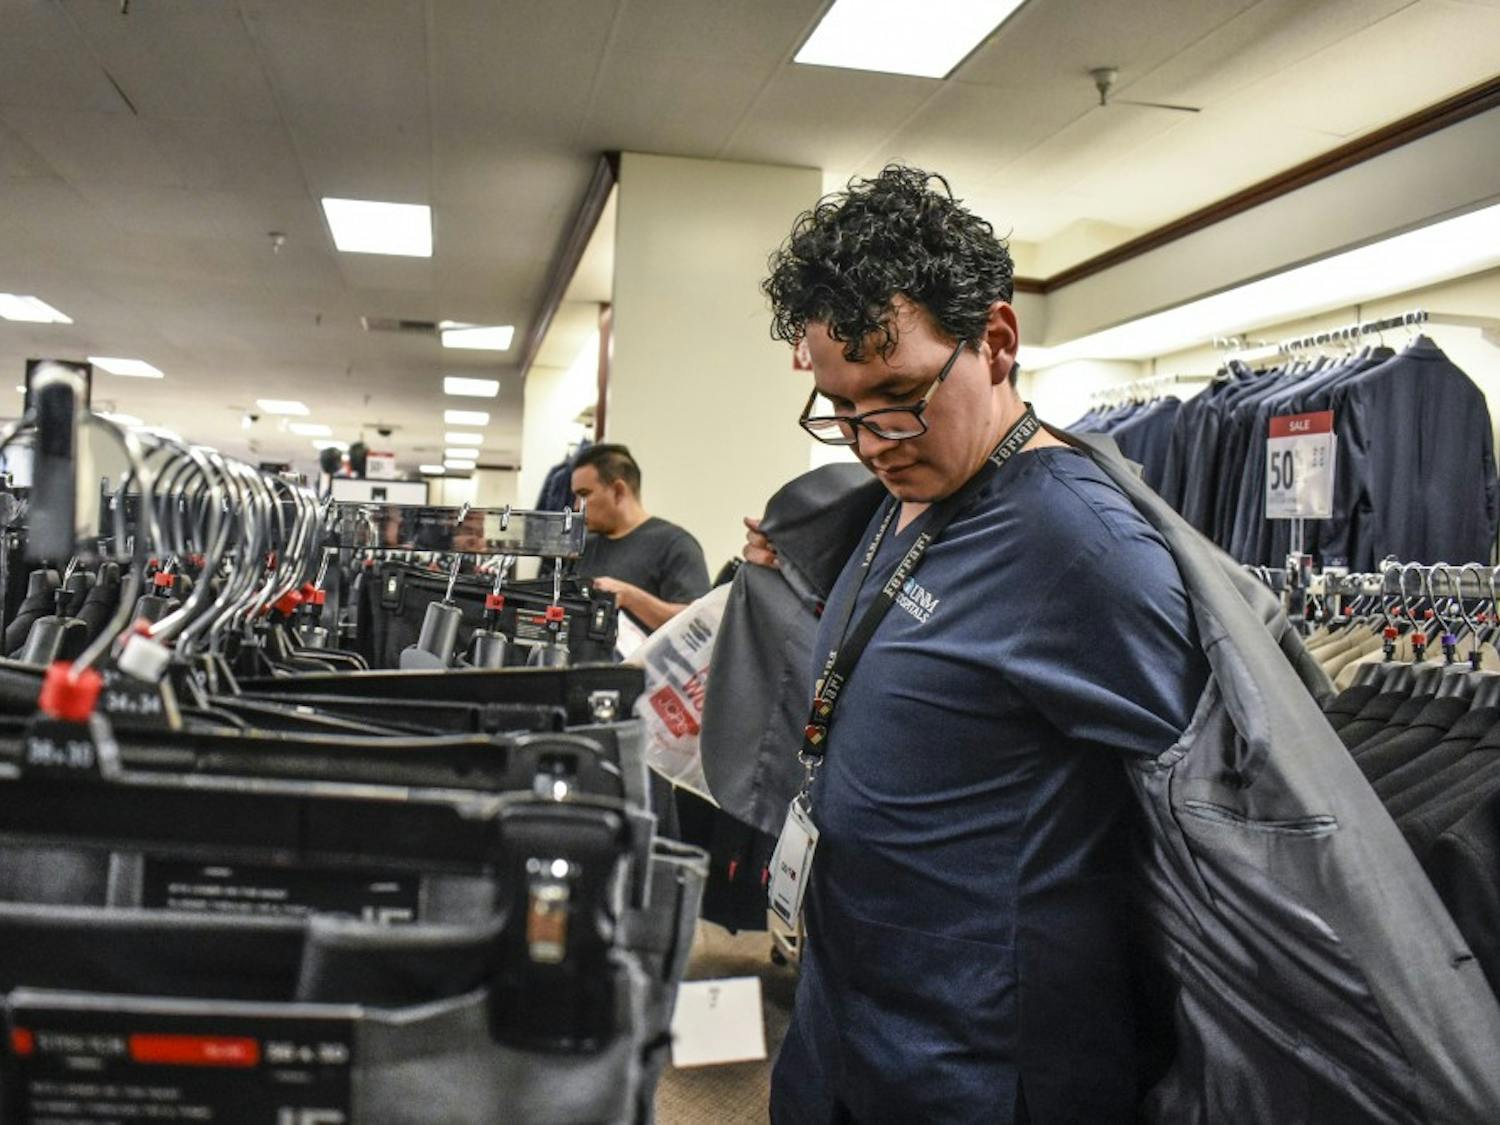 A University of New Mexico Hospital employee shops for a suit during College Suit Up on Sunday, Aug. 26.